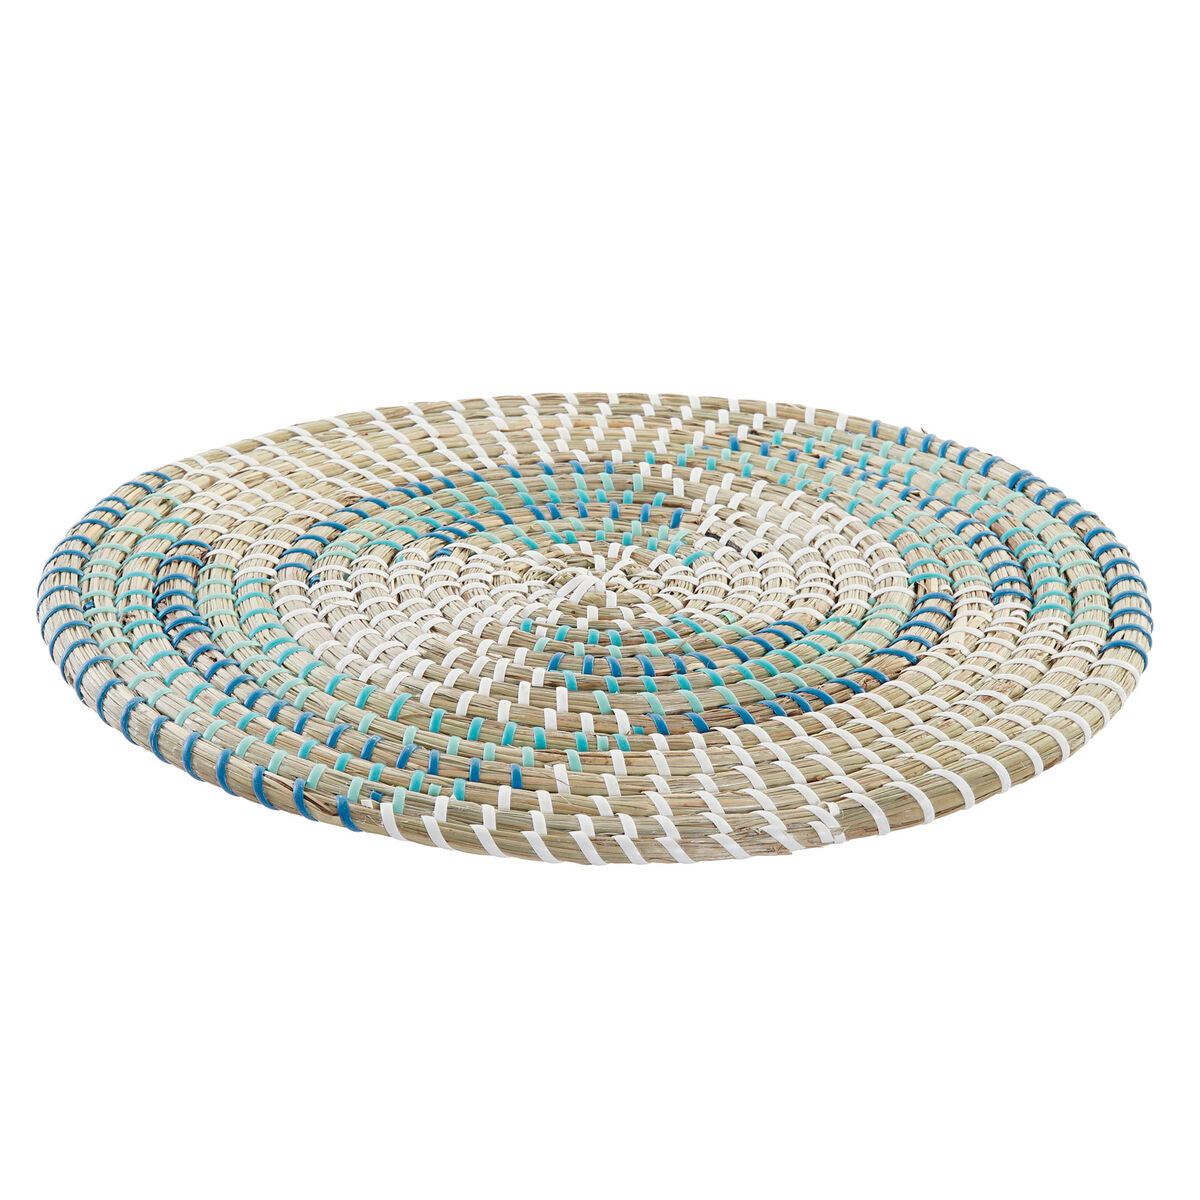 Table Mat DKD Home Decor White Turquoise Natural 33 x 1 x 33 cm